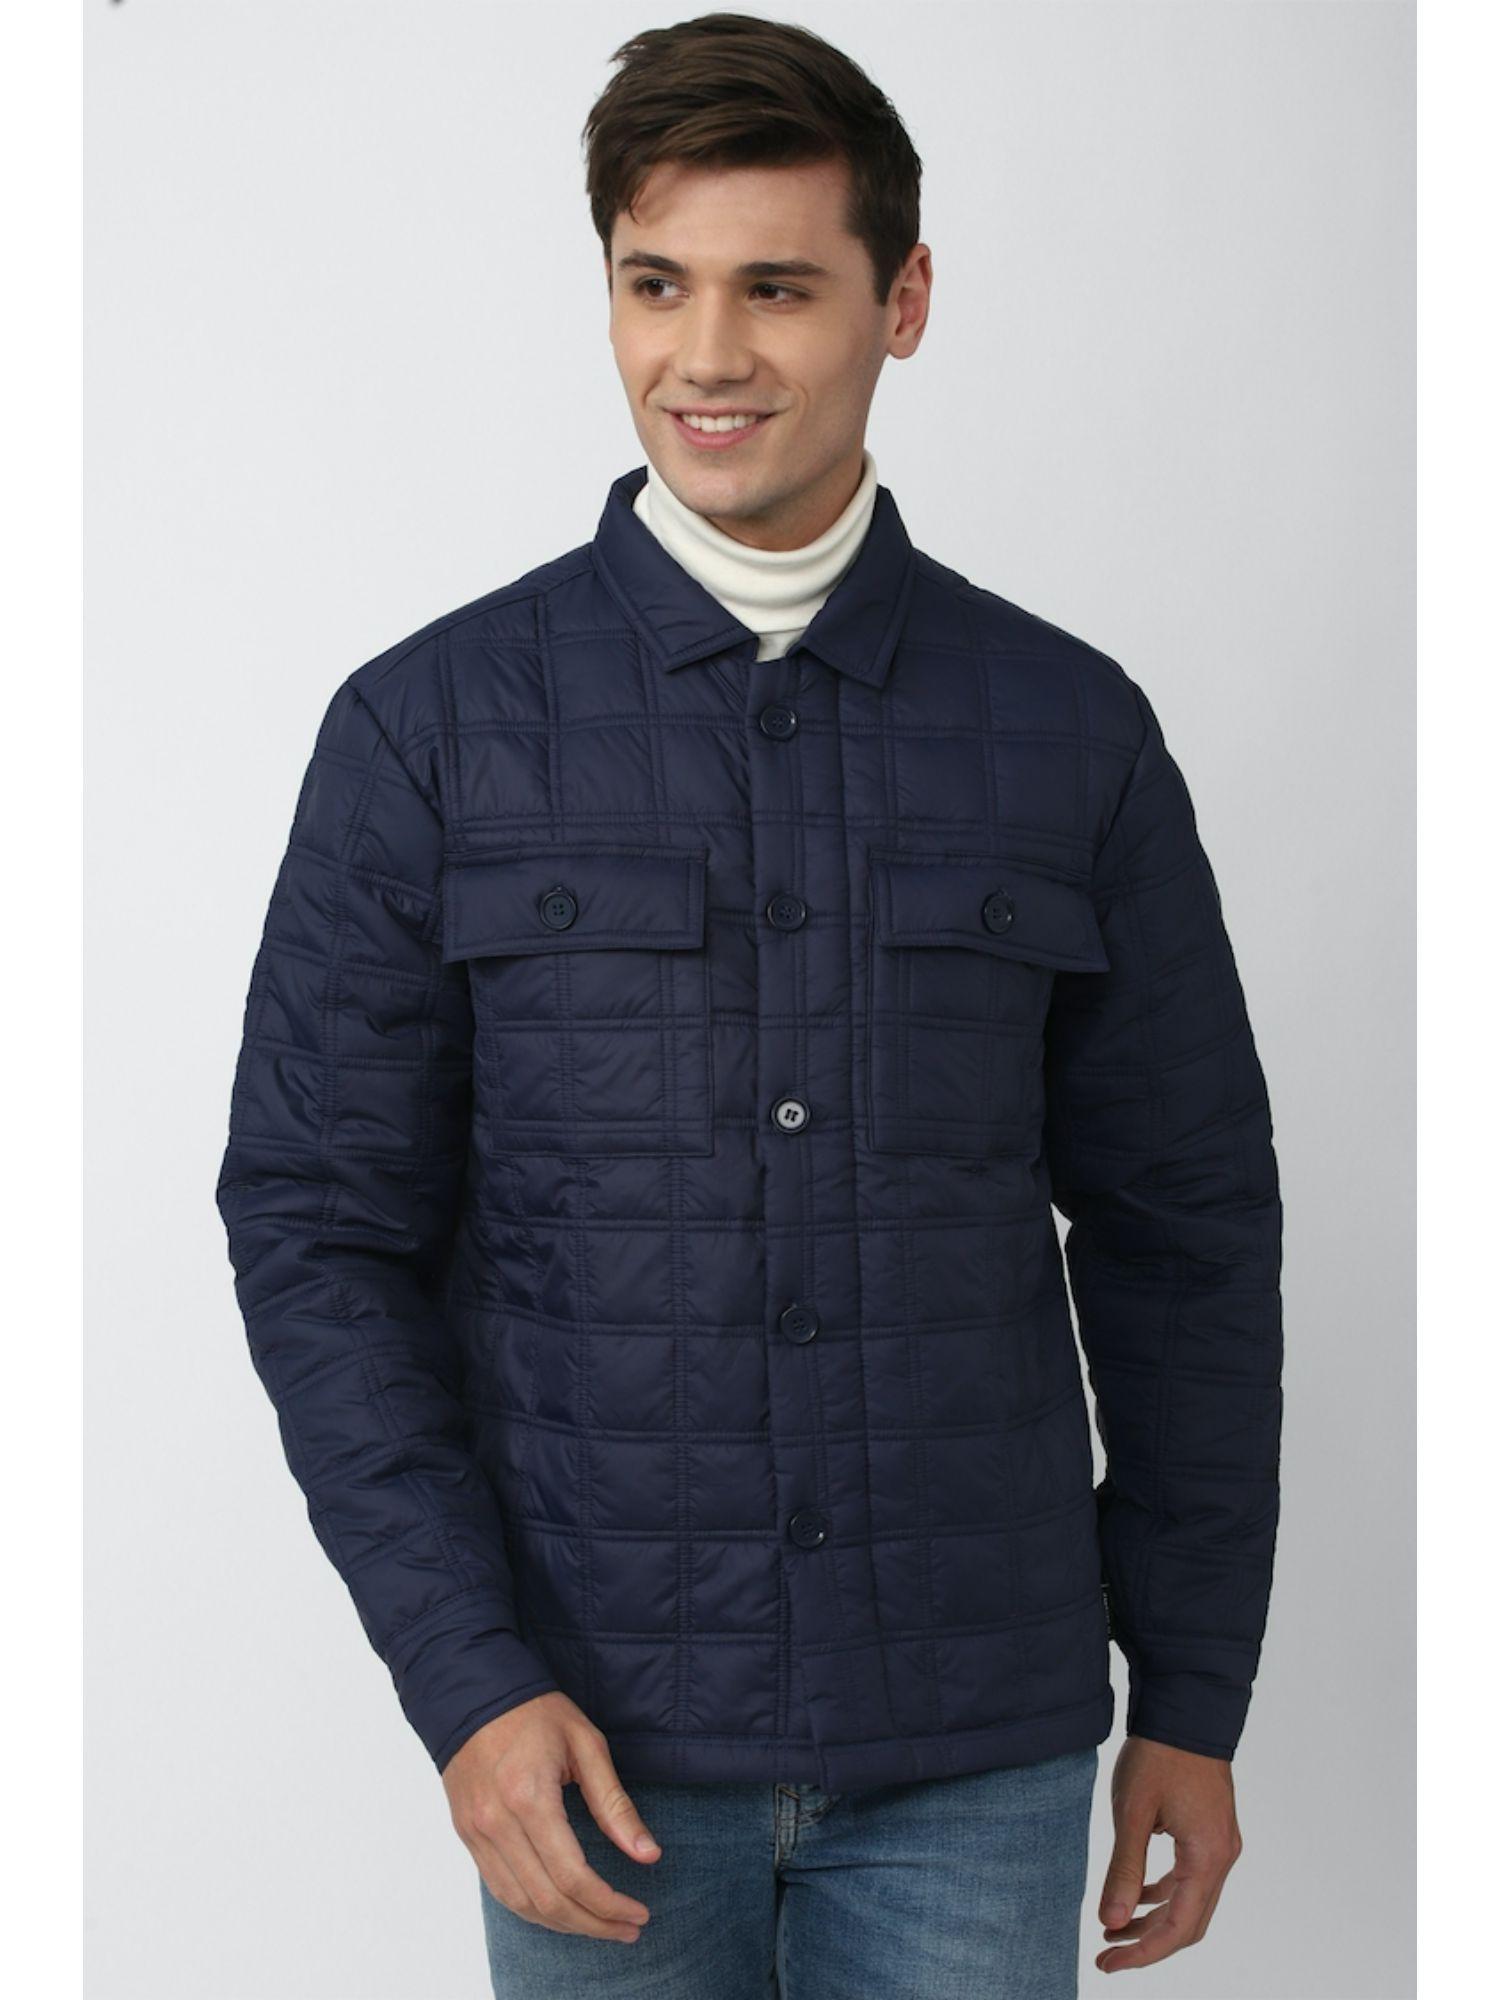 solid navy jackets